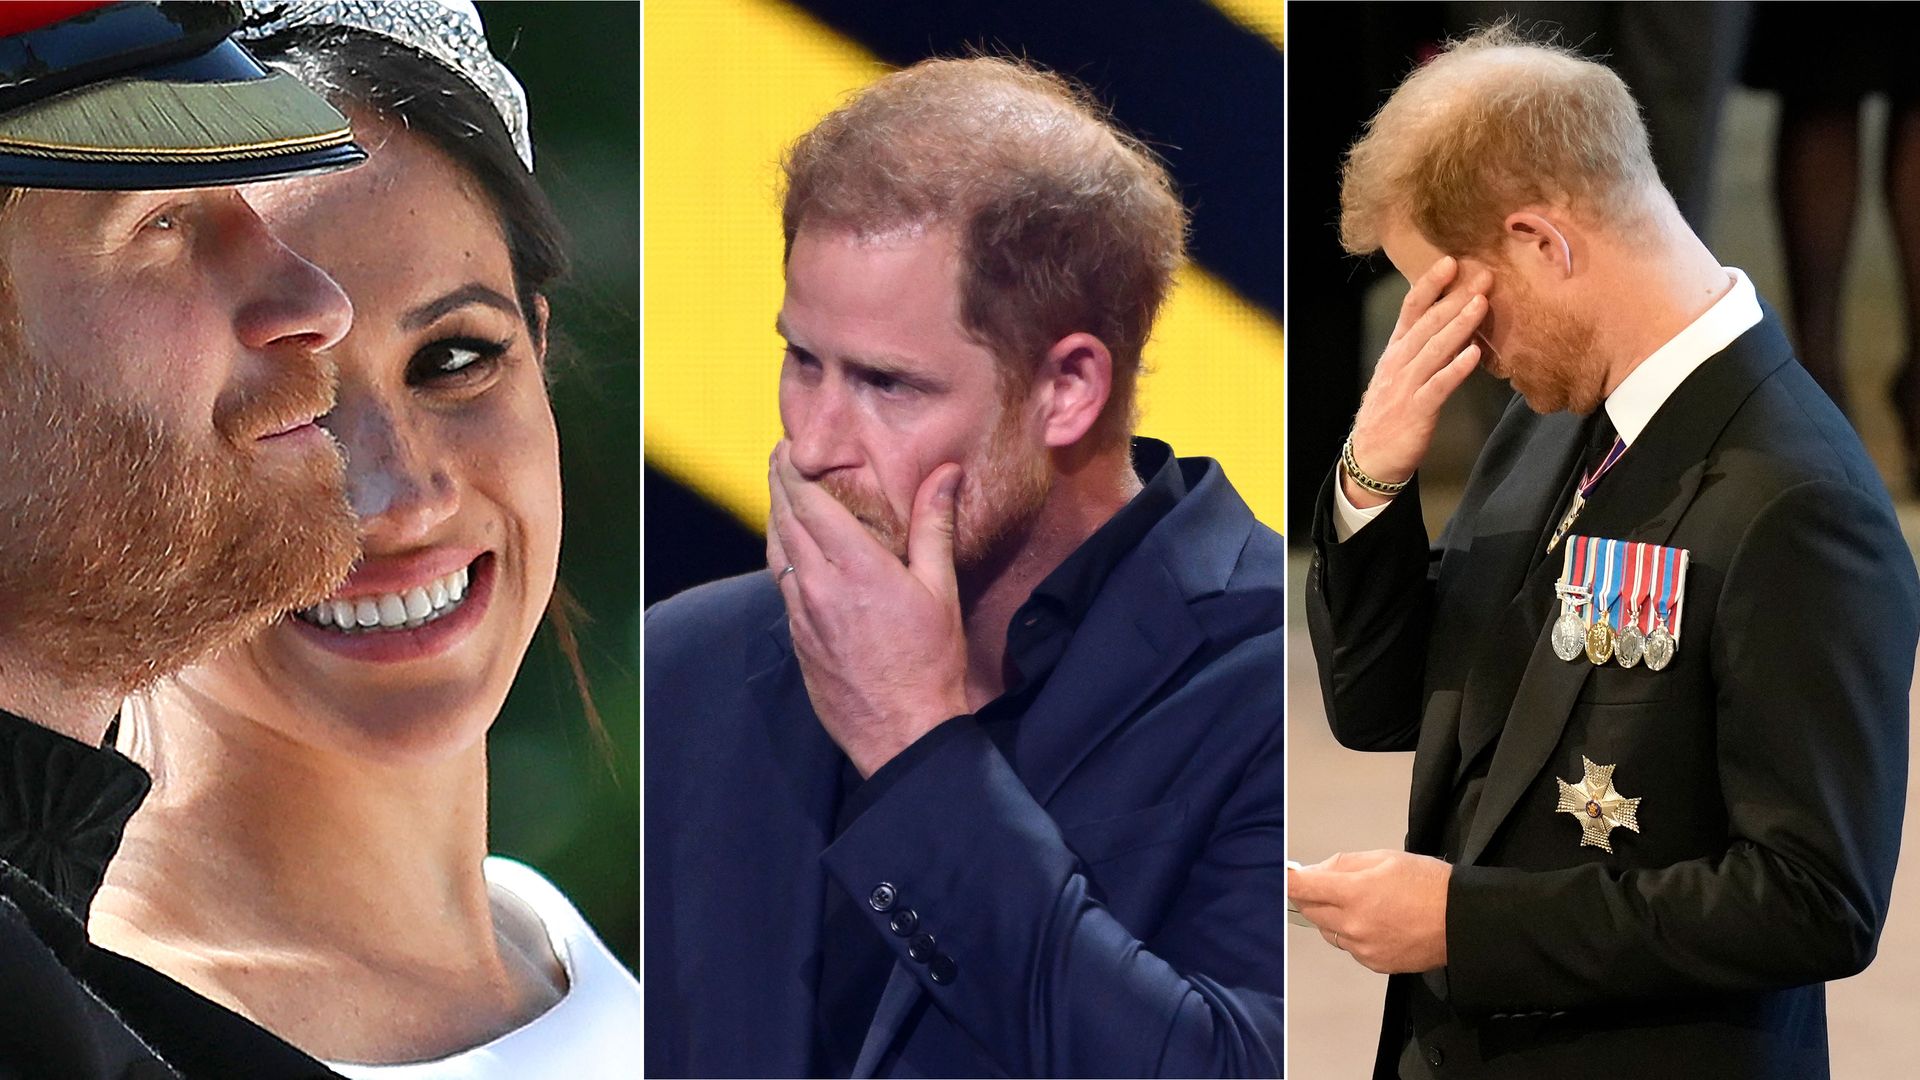 Prince Harry becoming emotional whilst with wife Meghan Markle